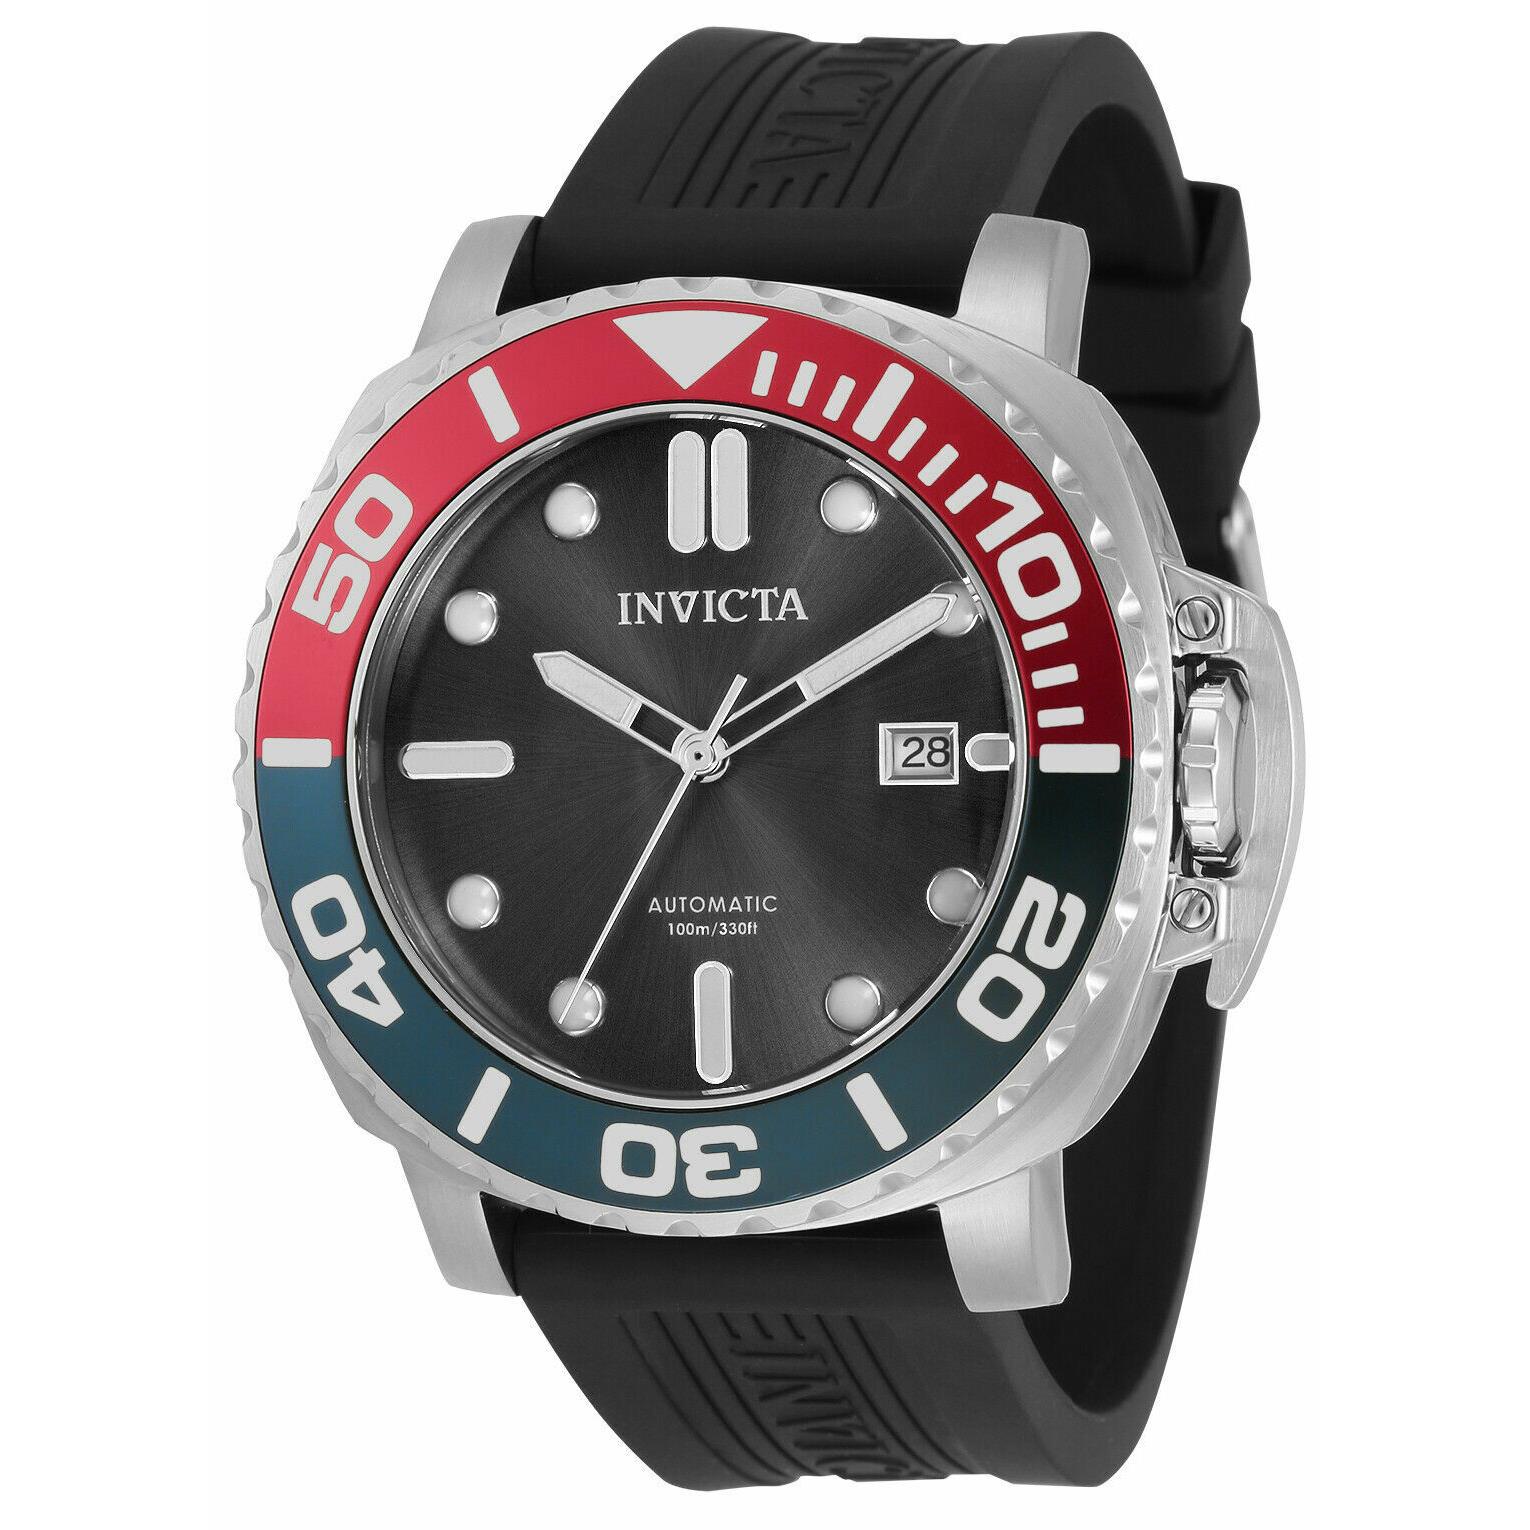 Invicta Pro Diver Men Silicone Blue Red Exhibition Automatic Date Watch 34317 - Black Dial, Black Band, Red/Blue Bezel